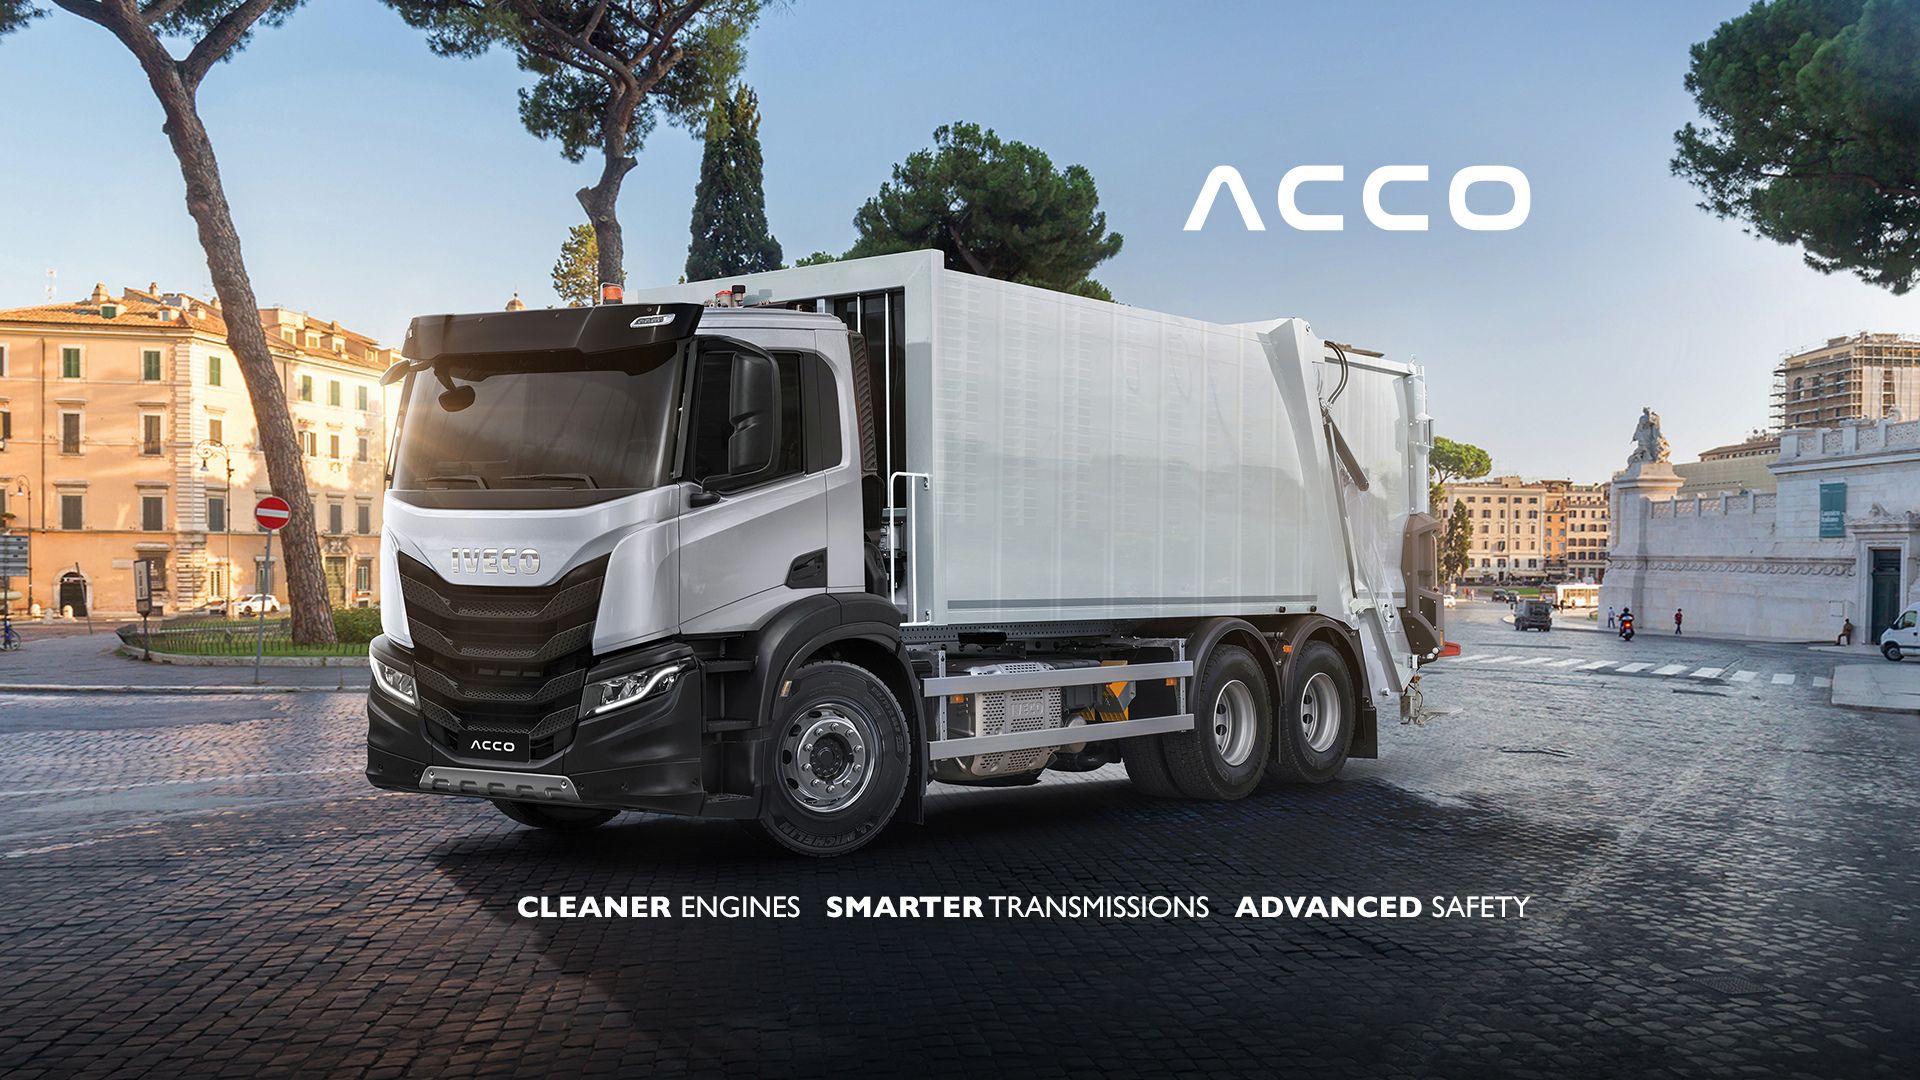 ACCO - CLEANER ENGINES SMARTER TRANSMISSIONS ADVANCED SAFETY